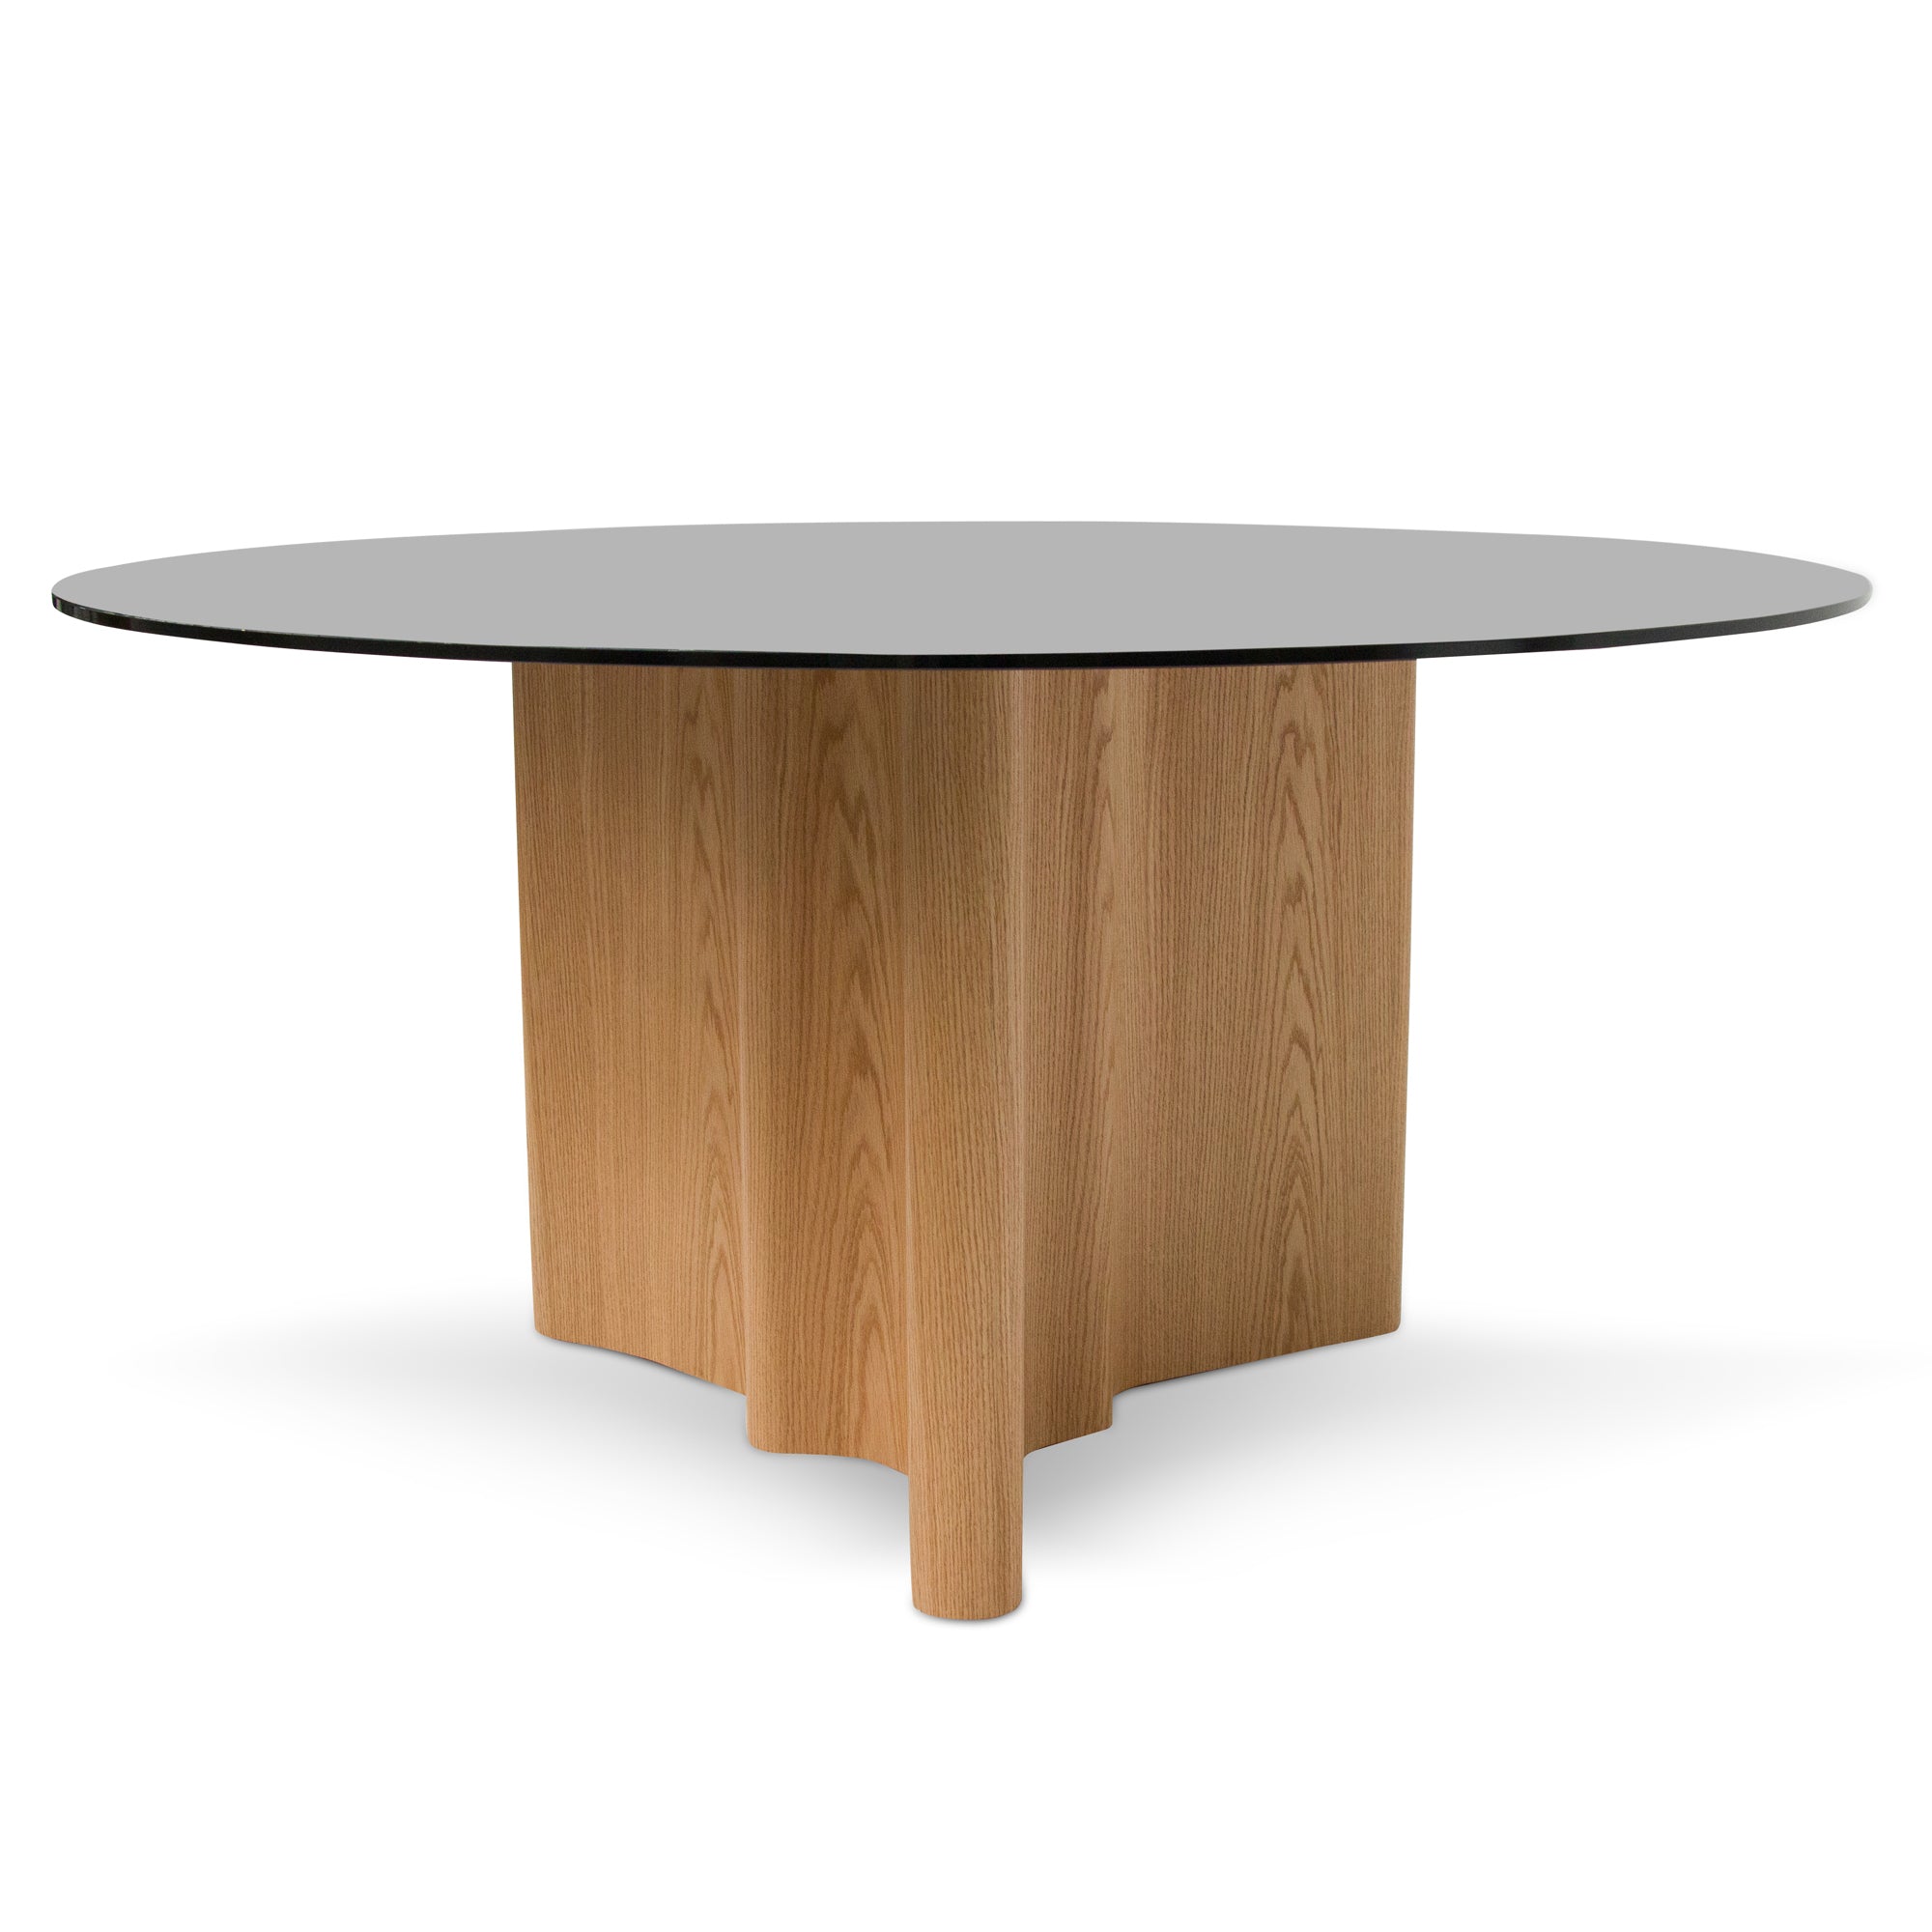 Blake 1.5m Round Glass Dining Table - Natural - Dining Tables